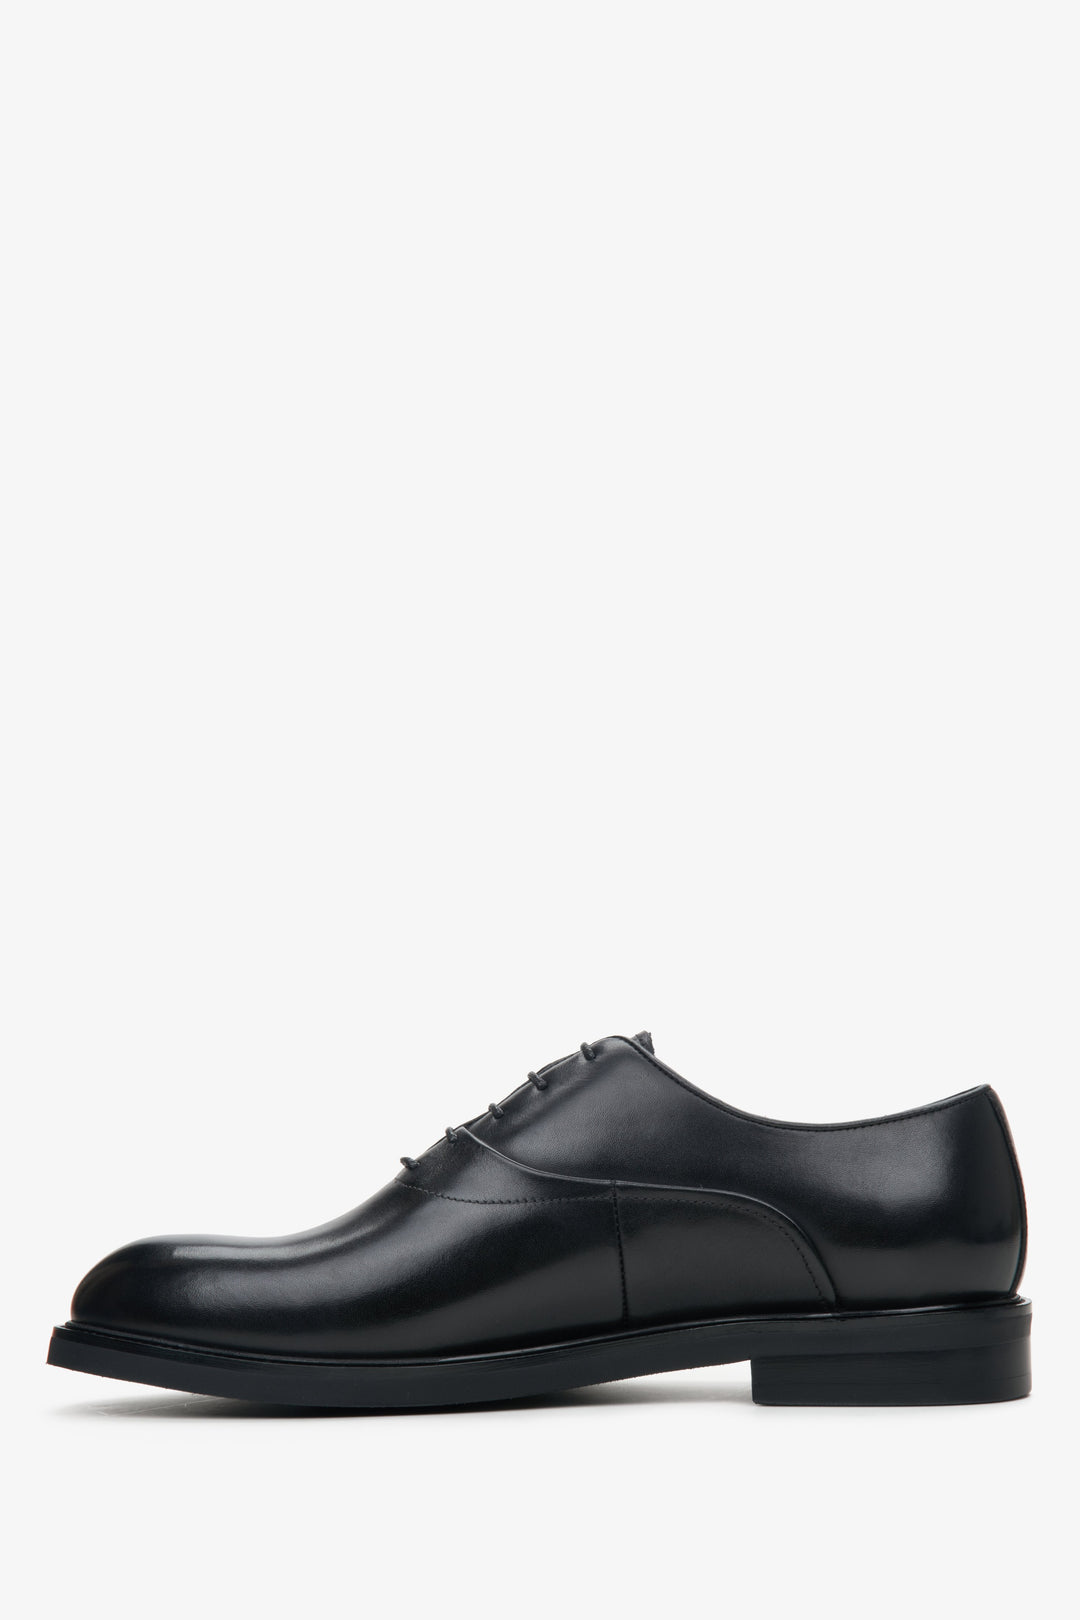 Lace-up men's Oxford shoes made of black genuine leather by Estro - shoe profile.